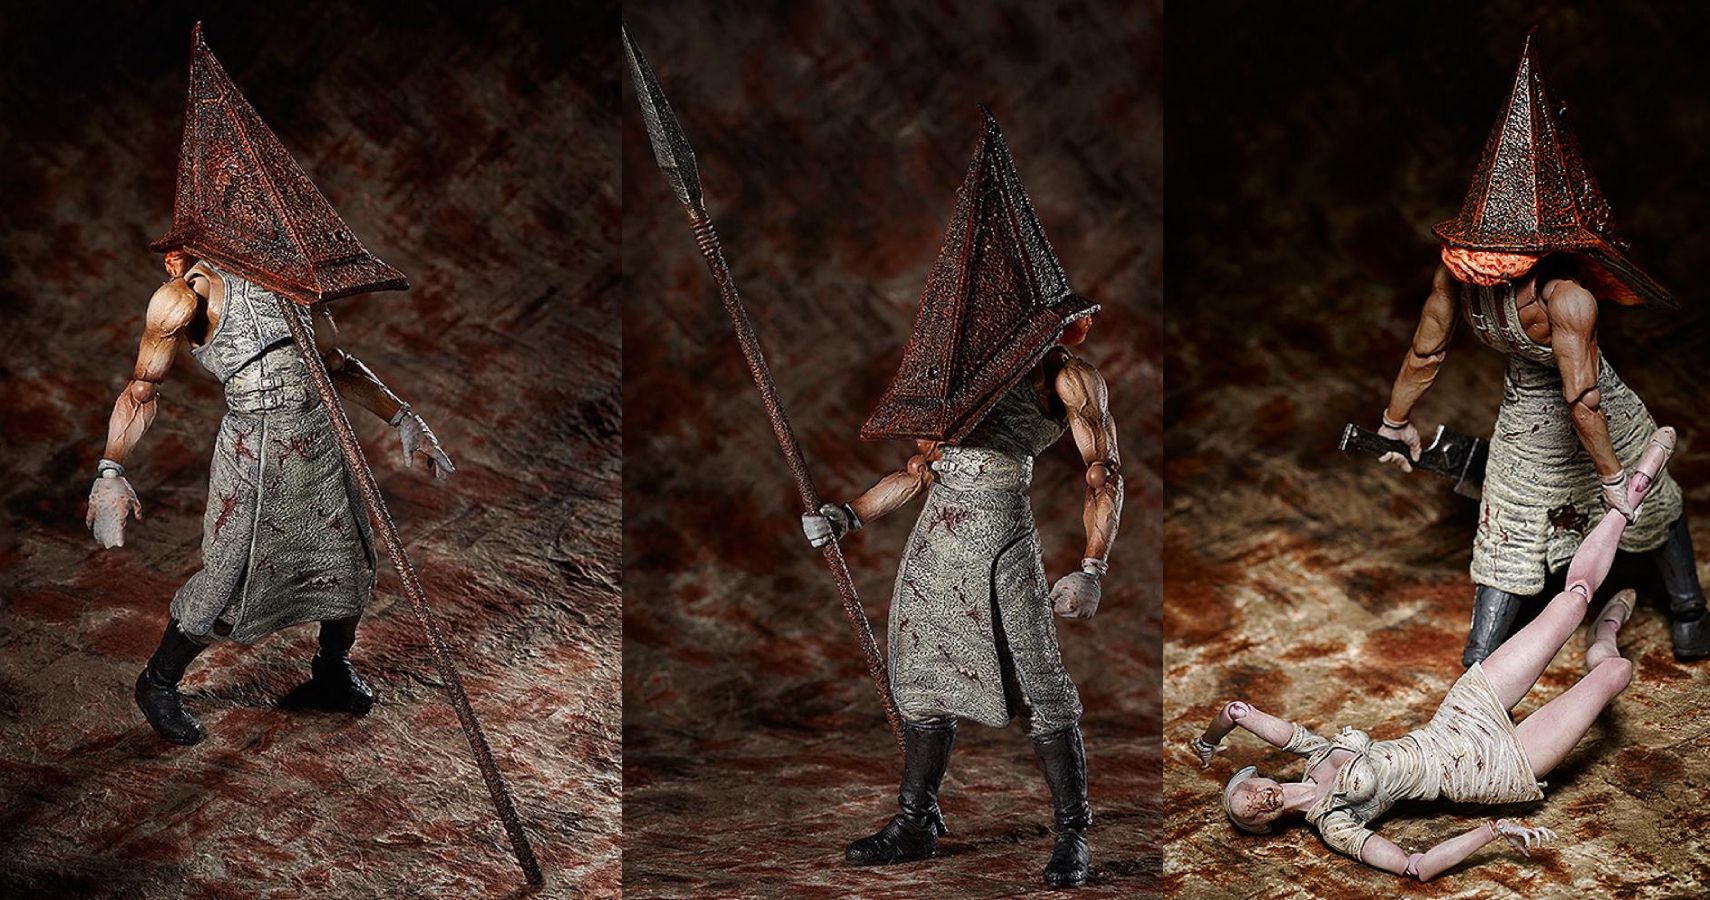 PreOrder These Gorgeously Horrifying Silent Hill 2 Figmas Now